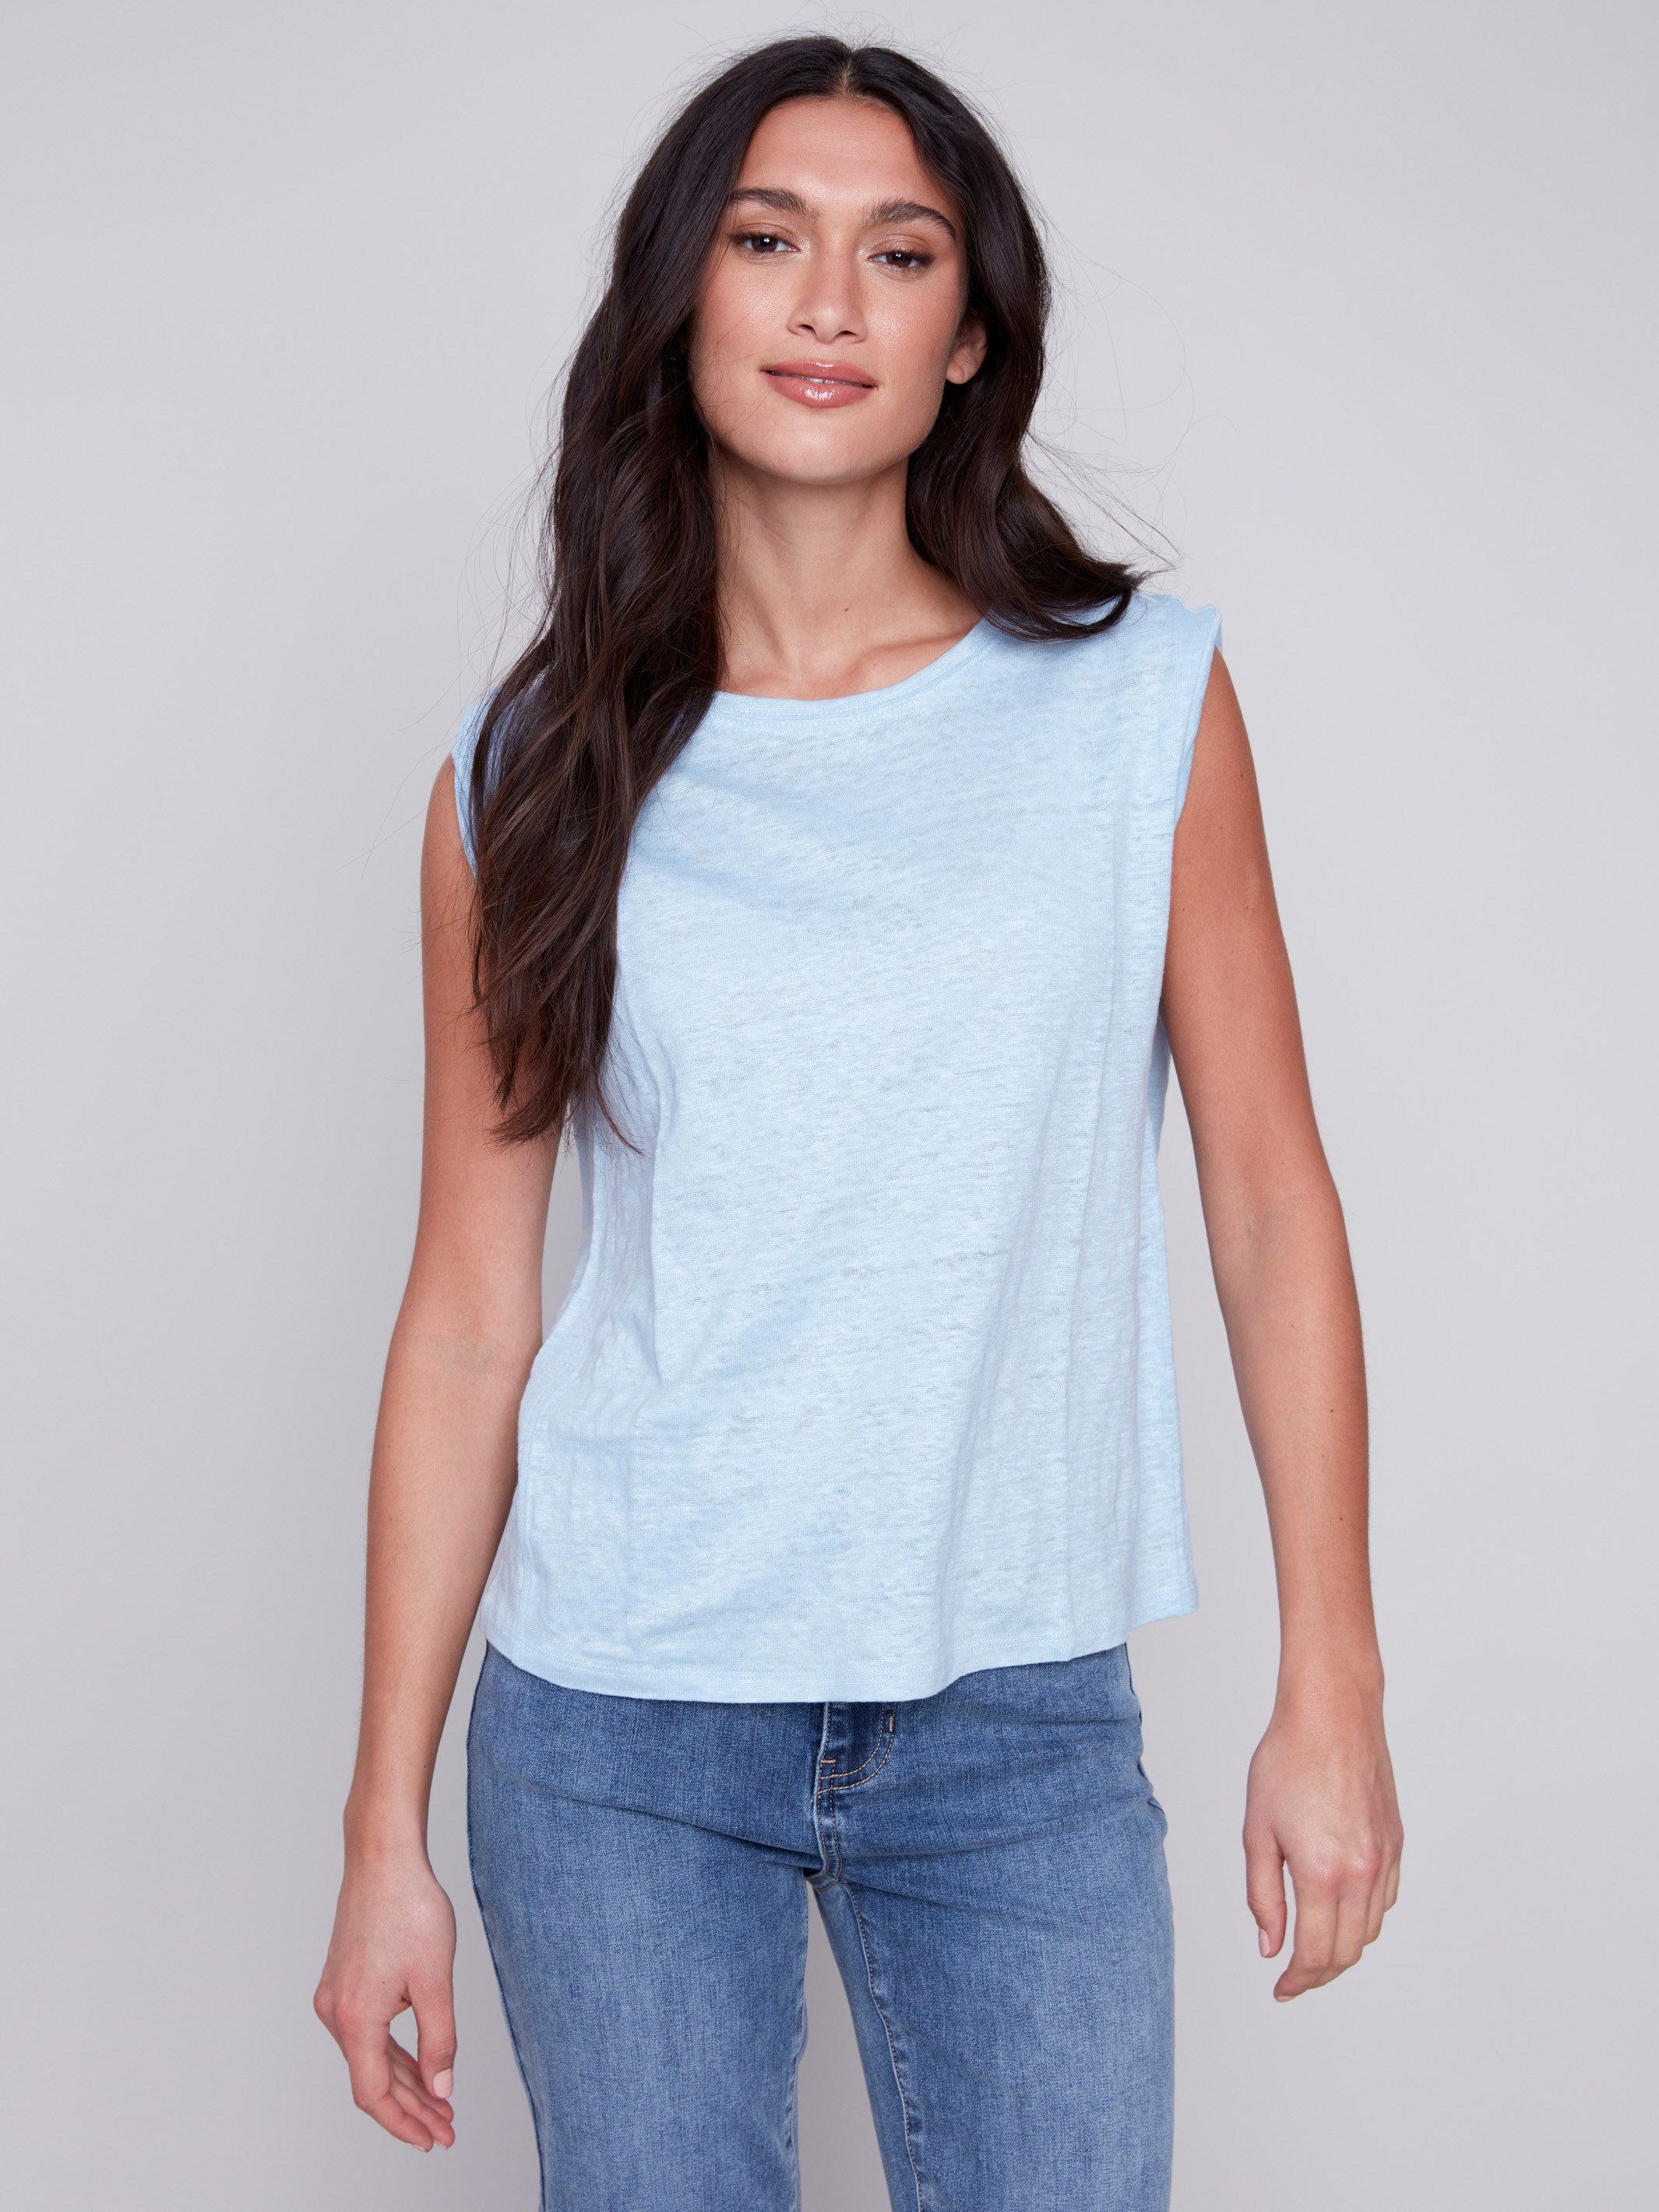 Linen Tank Top with Sleeve Detail - Sky - Charlie B Collection Canada - Image 4